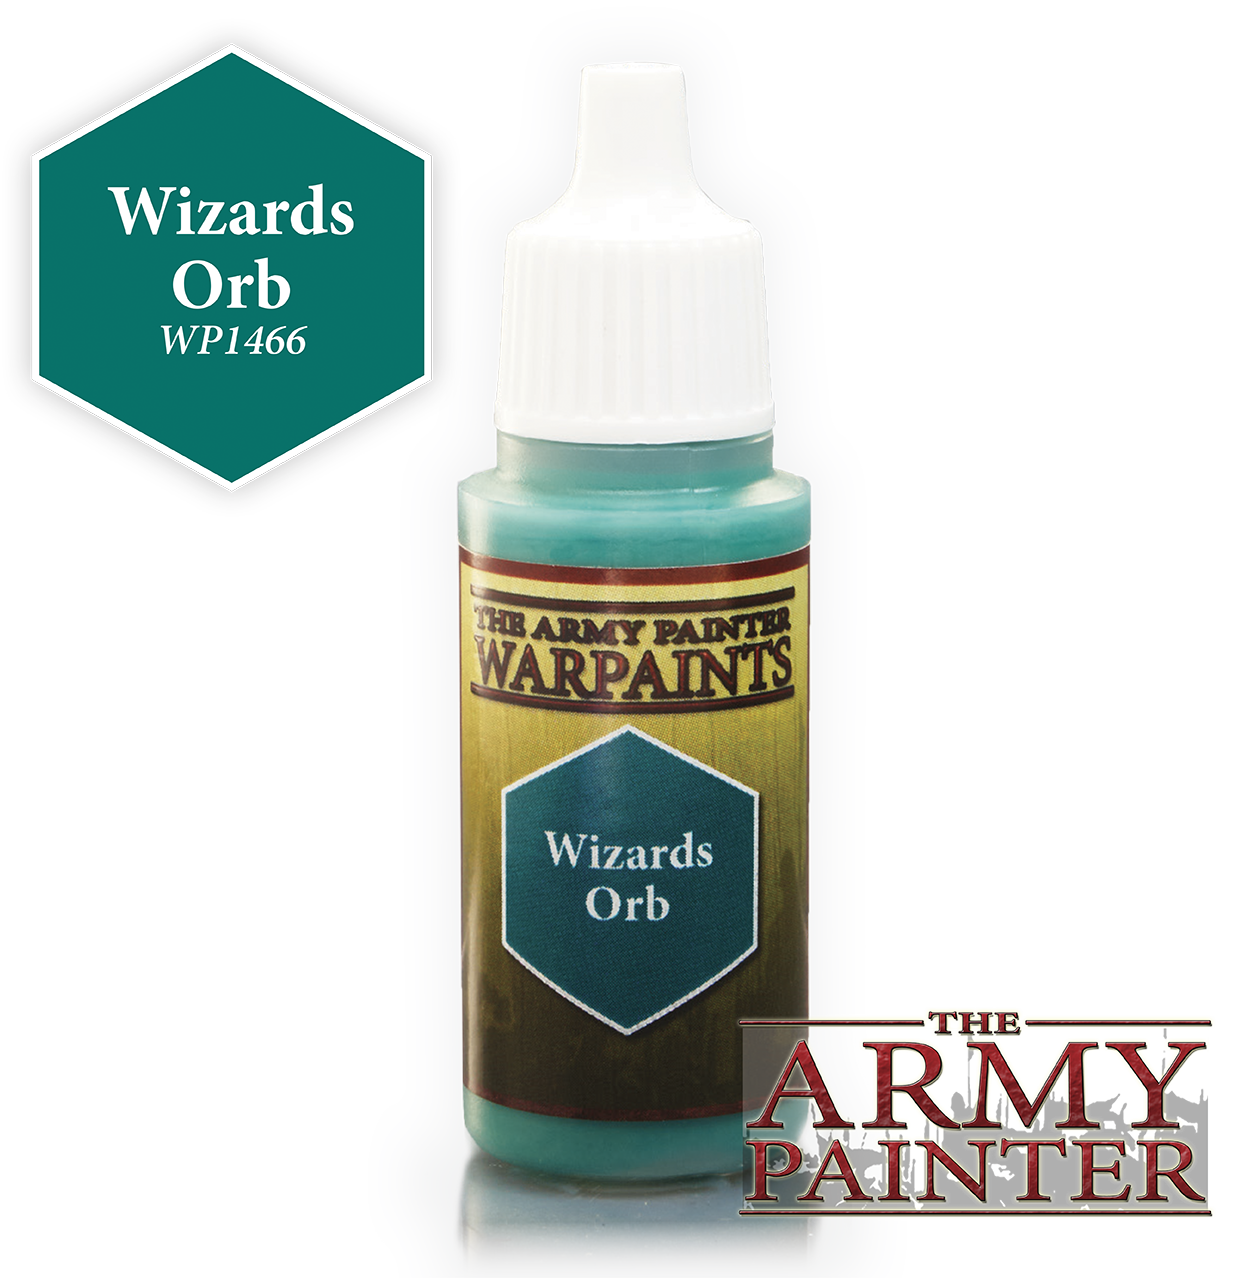 Wizards Orb - Army Painter Warpaints